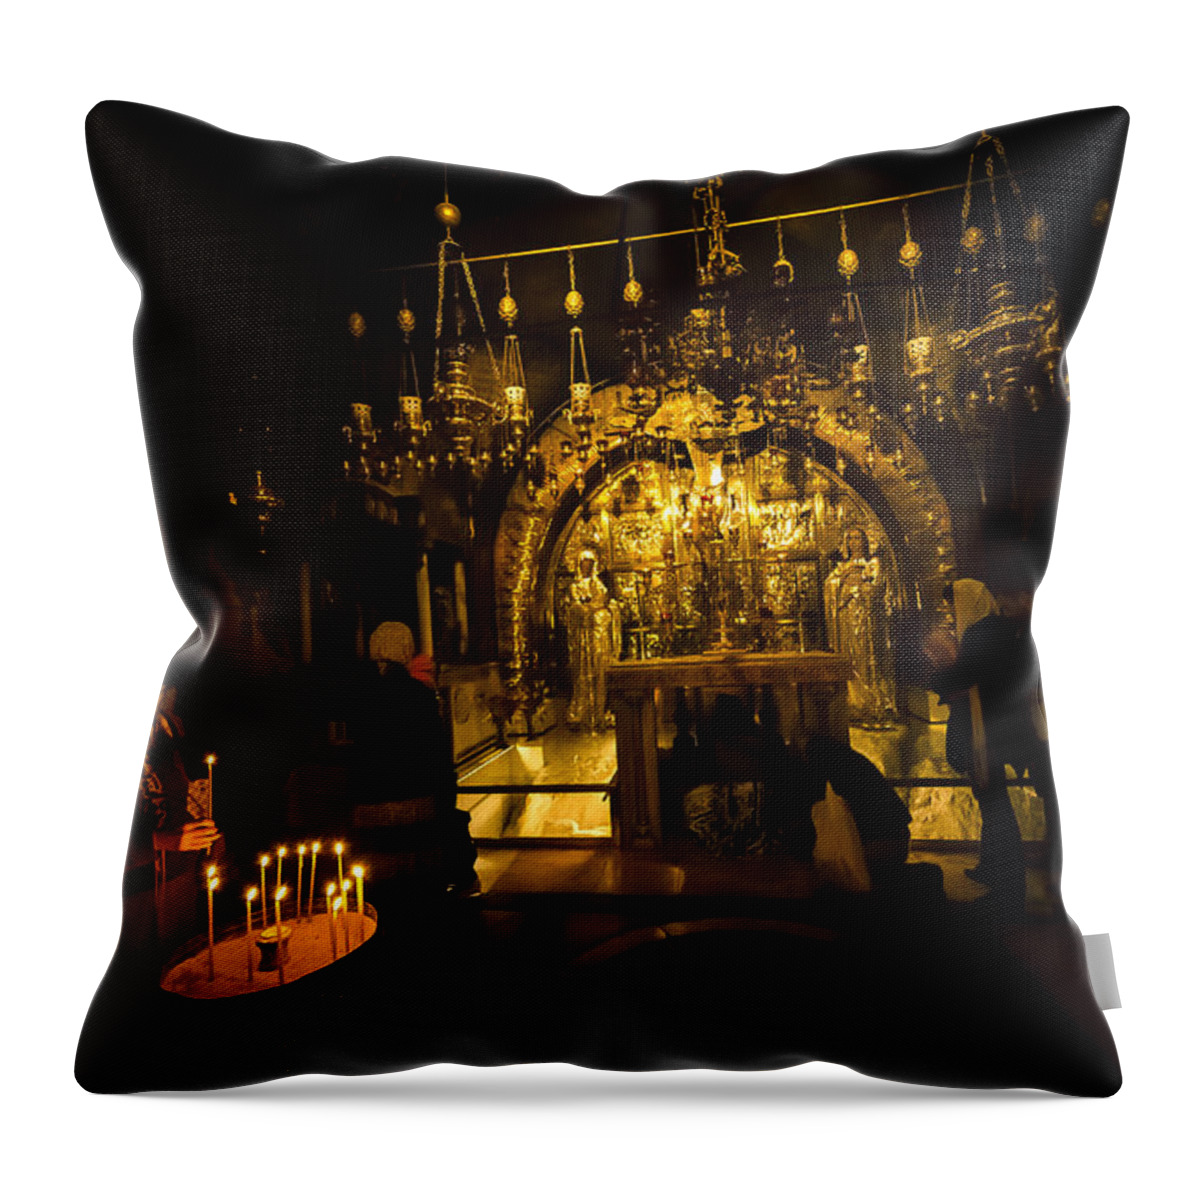 Altar Of The Crucifixion Throw Pillow featuring the photograph Altar of the Crucifixion by David Morefield